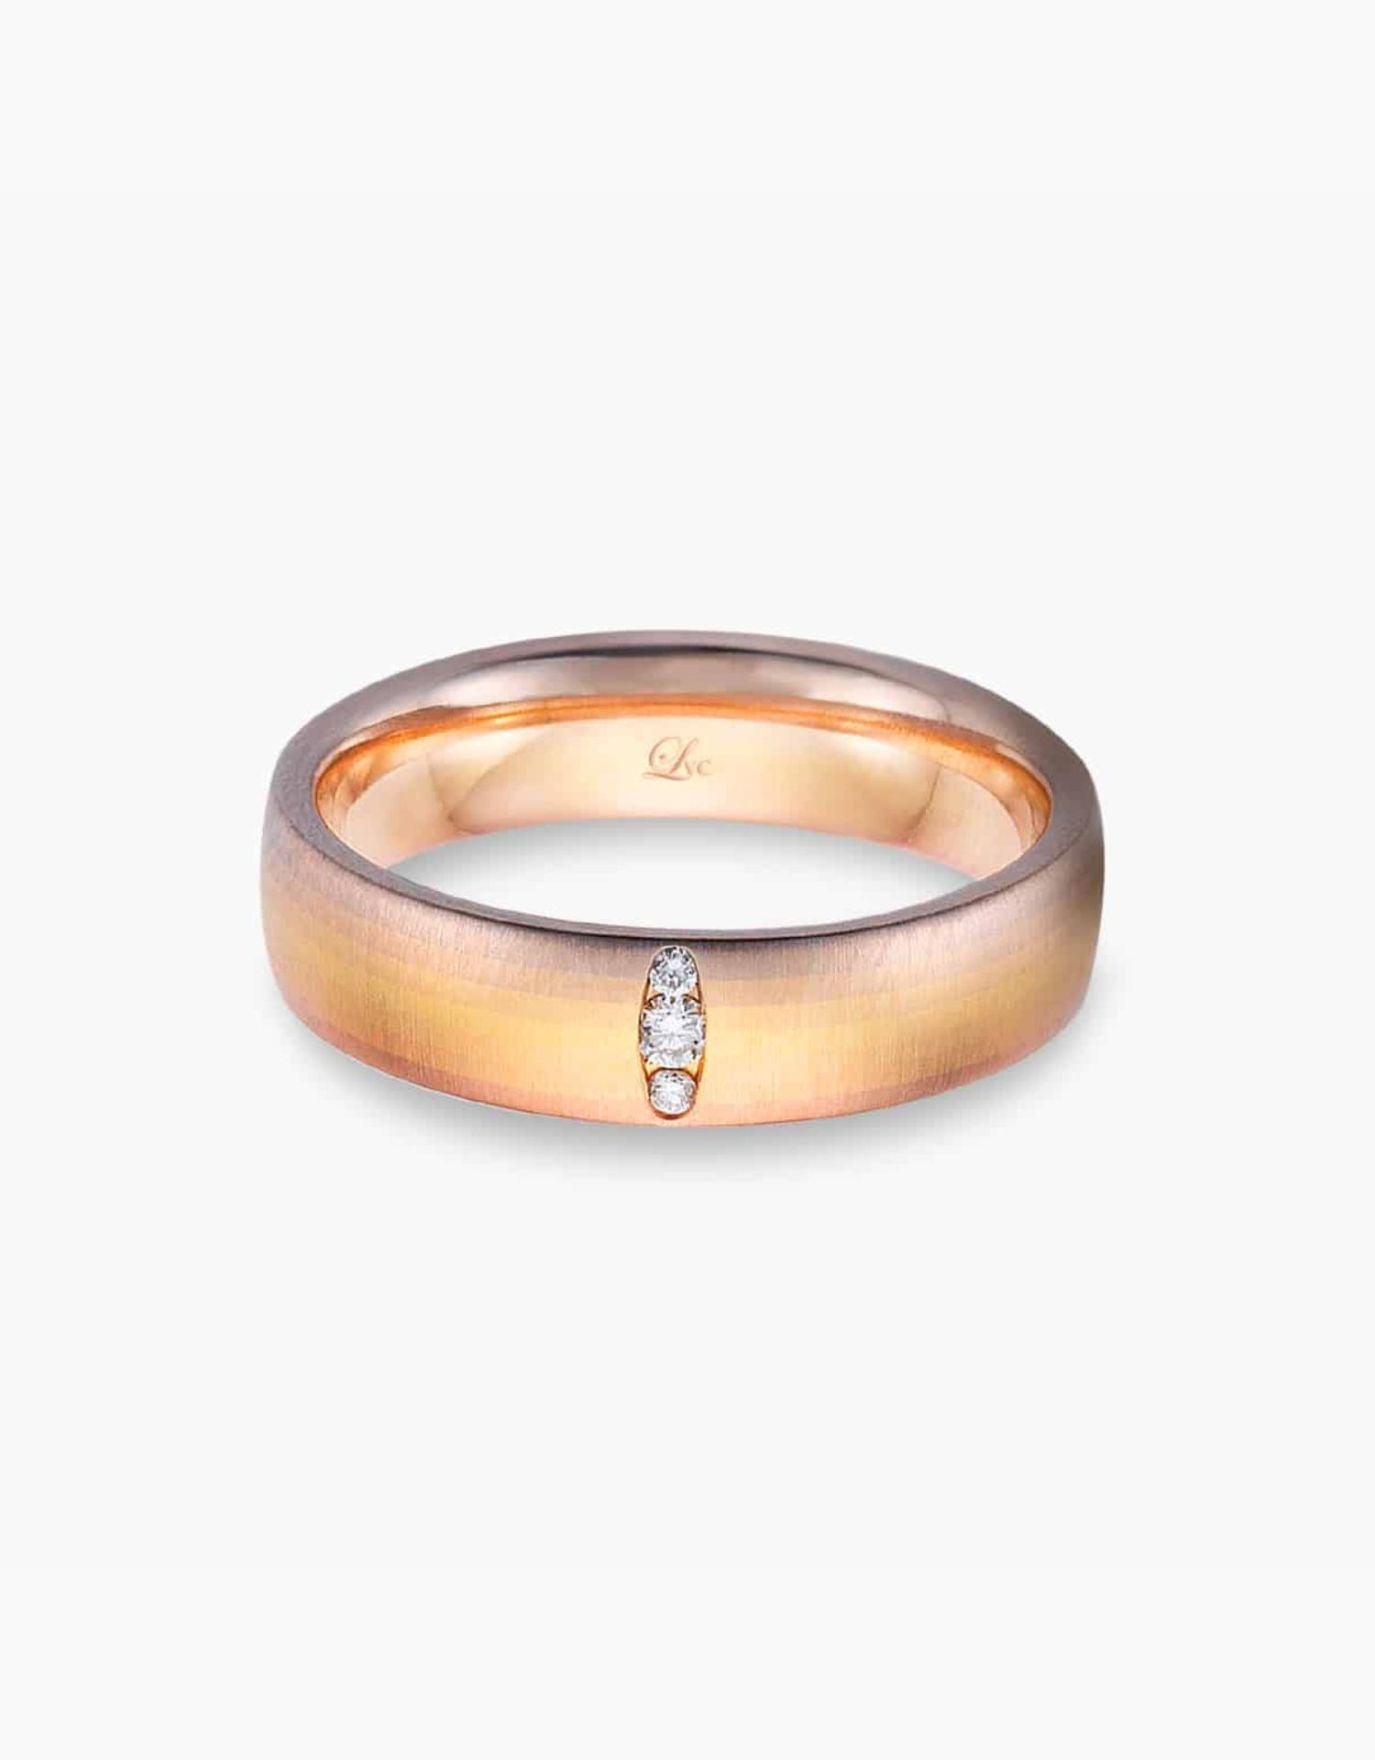 LVC Soleil Aurora Wedding Band in Yellow, White and Rose Gold Flushed with Diamonds